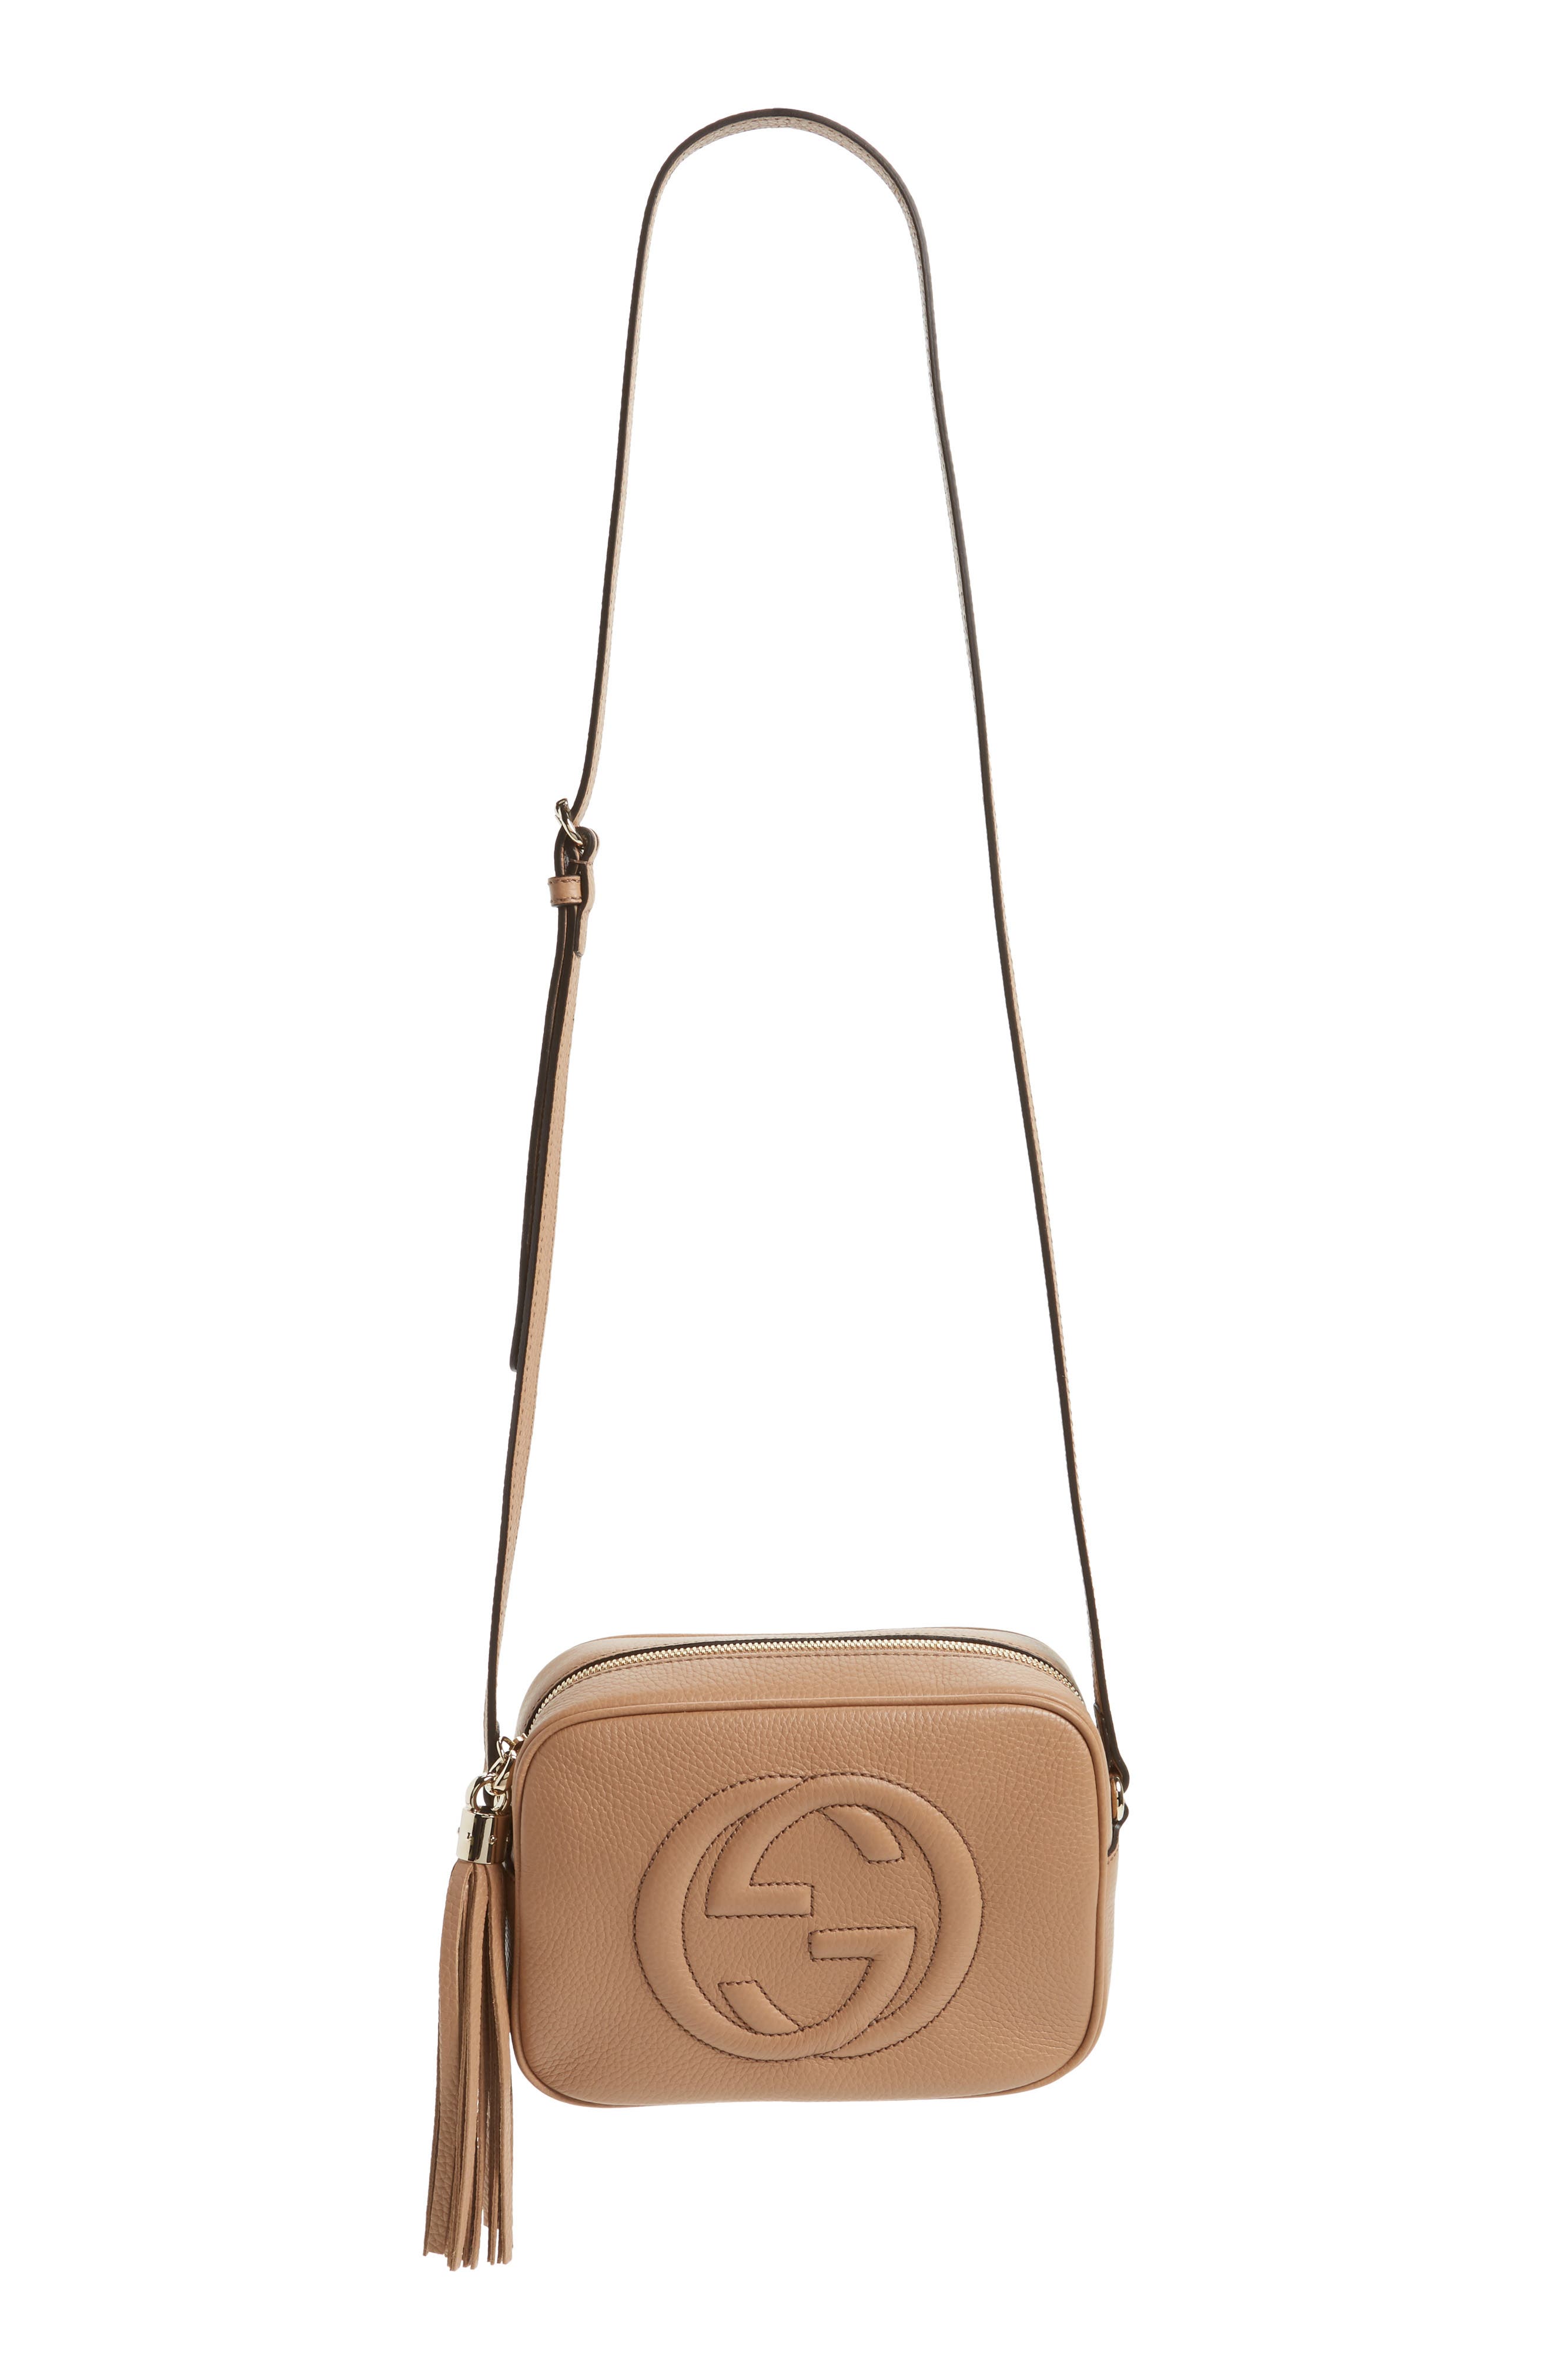 Gucci Disco Leather Bag | Nordstrom